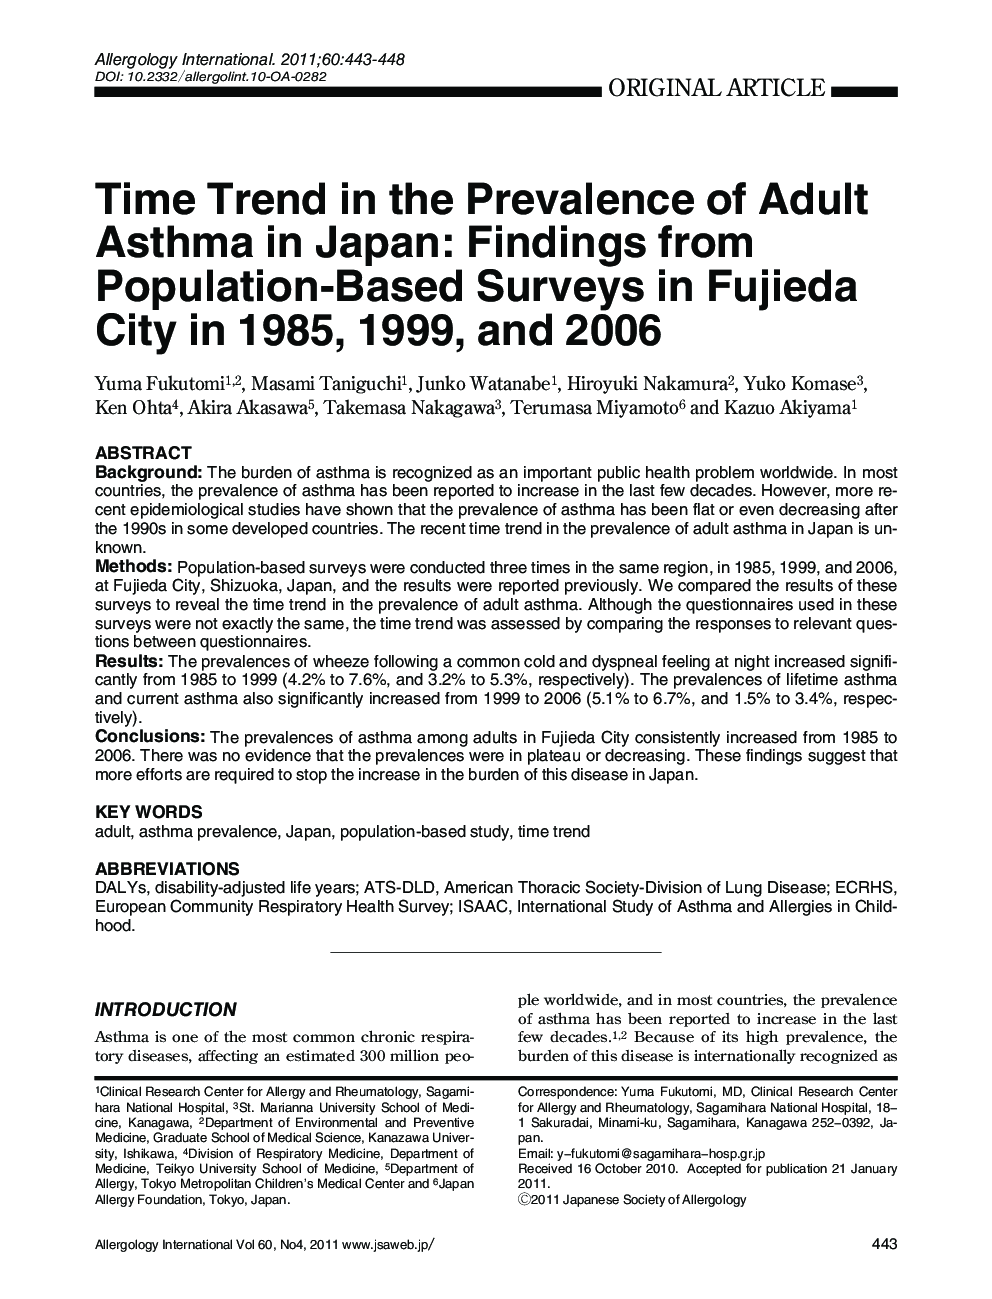 Time Trend in the Prevalence of Adult Asthma in Japan: Findings from Population-Based Surveys in Fujieda City in 1985,1999, and 2006